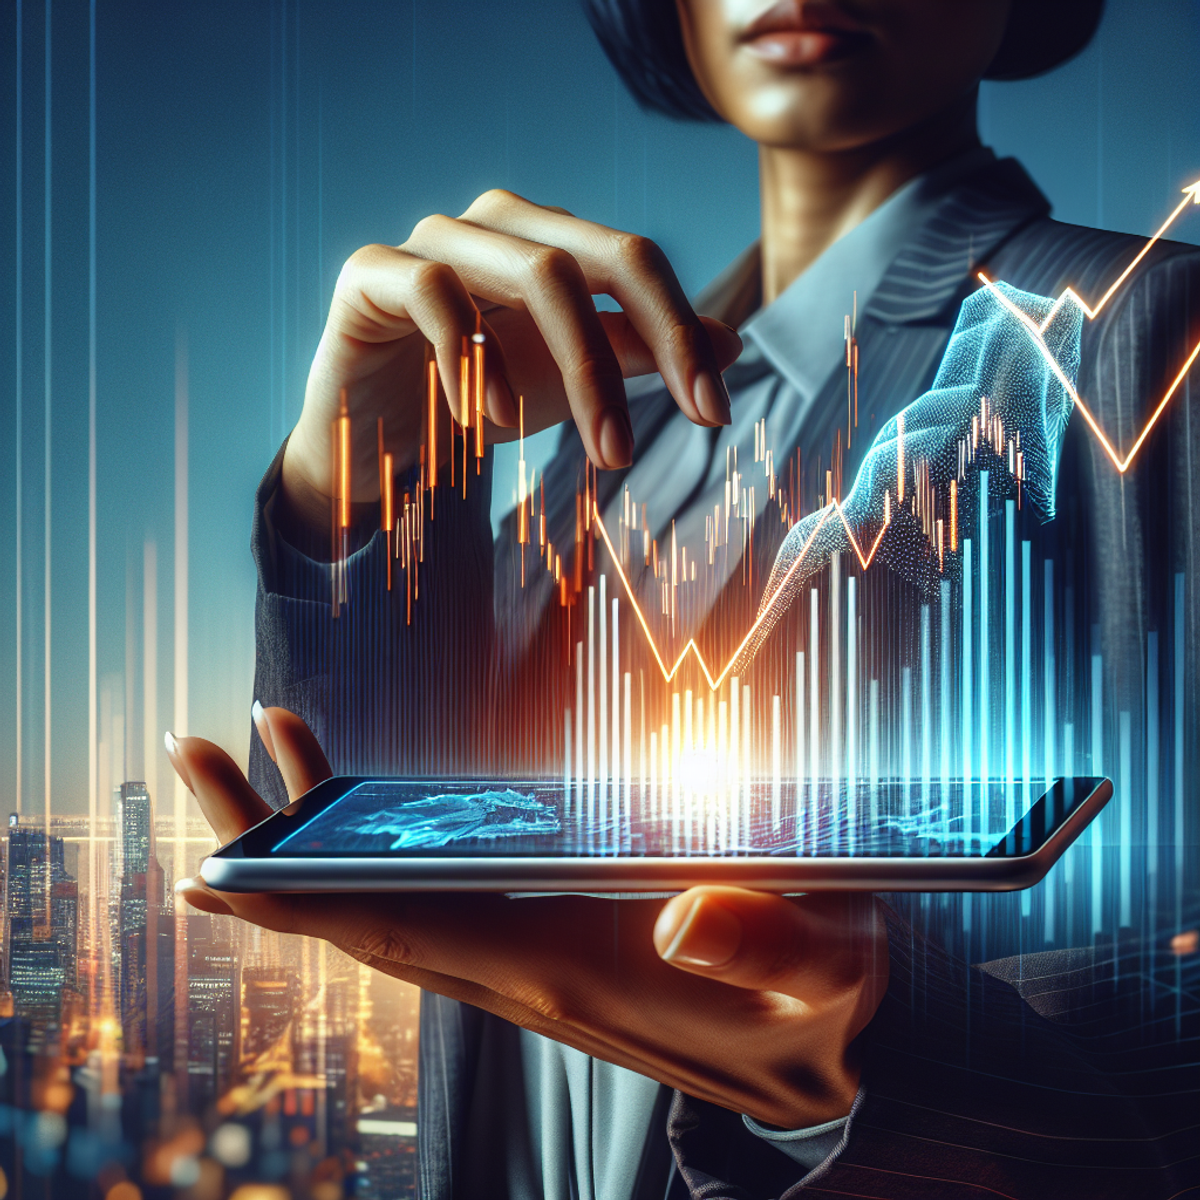 A professional individual of South Asian descent, gender fluid, holding a digital tablet displaying a stock market graph.